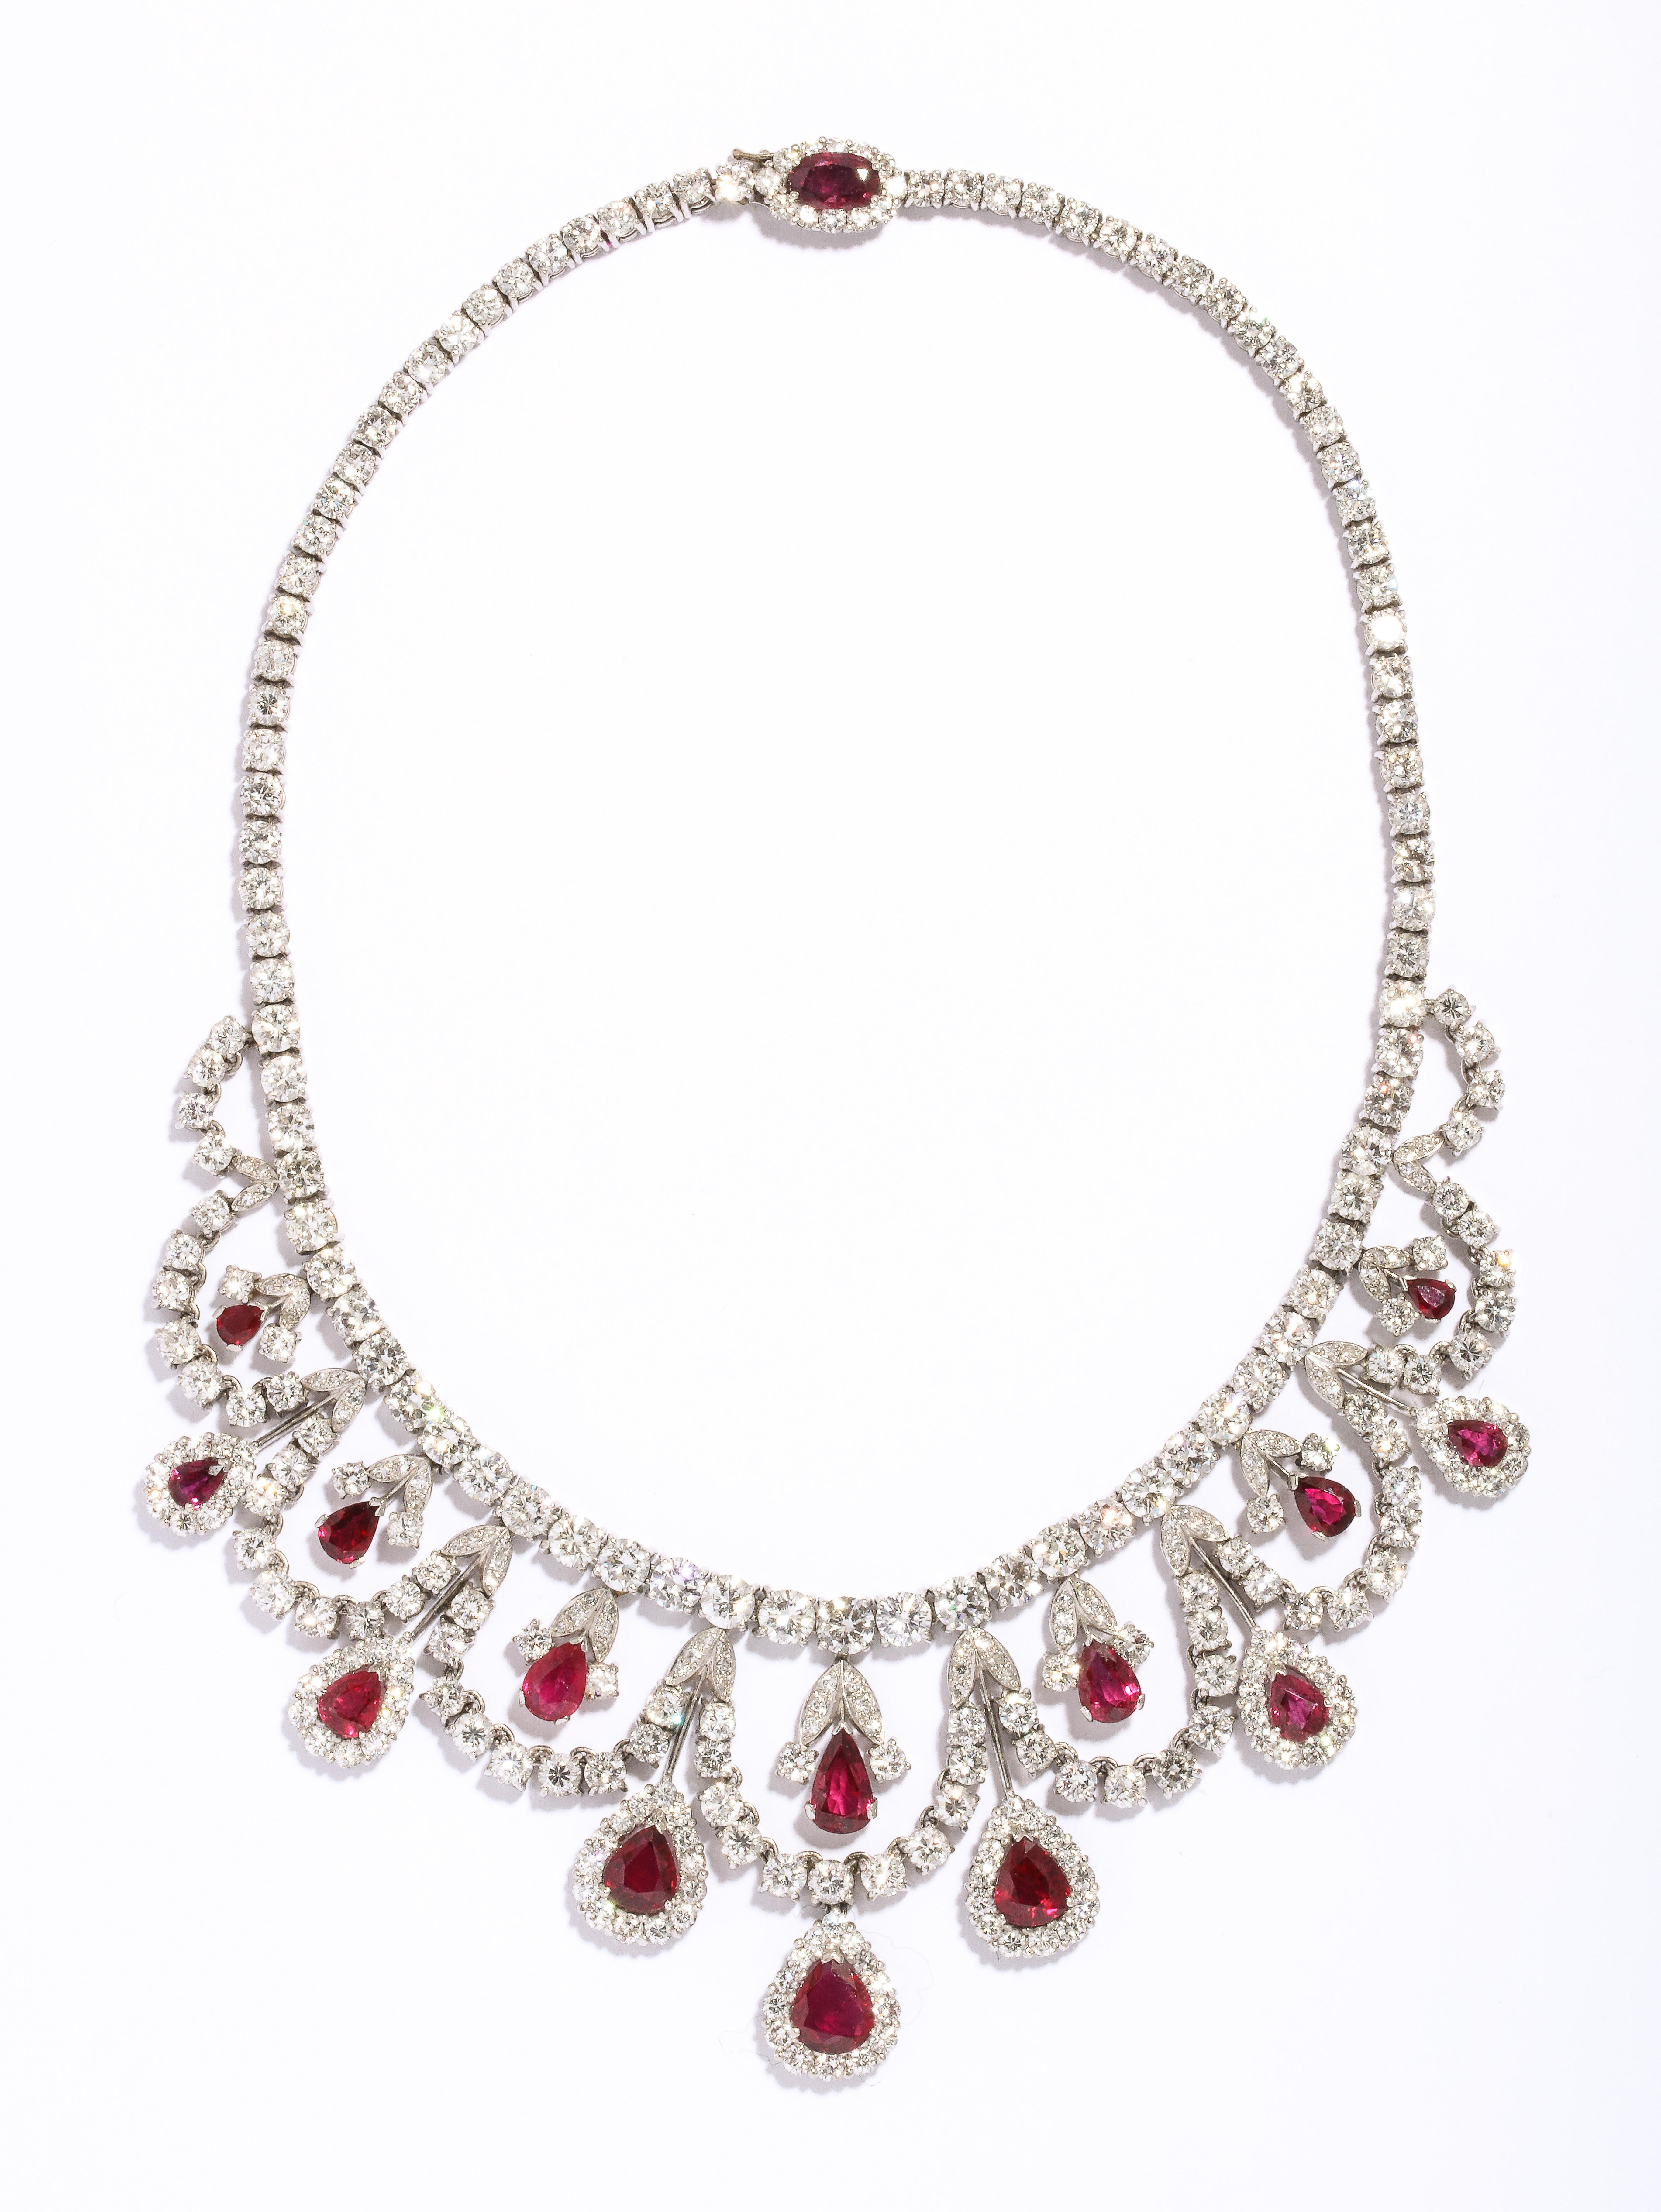 AGL Certified Ruby & Diamond Necklace 
Larger Rubies: 5.13 Cts
Smaller Rubies: 13.36 Cts
Diamond Weight: Approximately 45.00 Cts
Measurements: 15